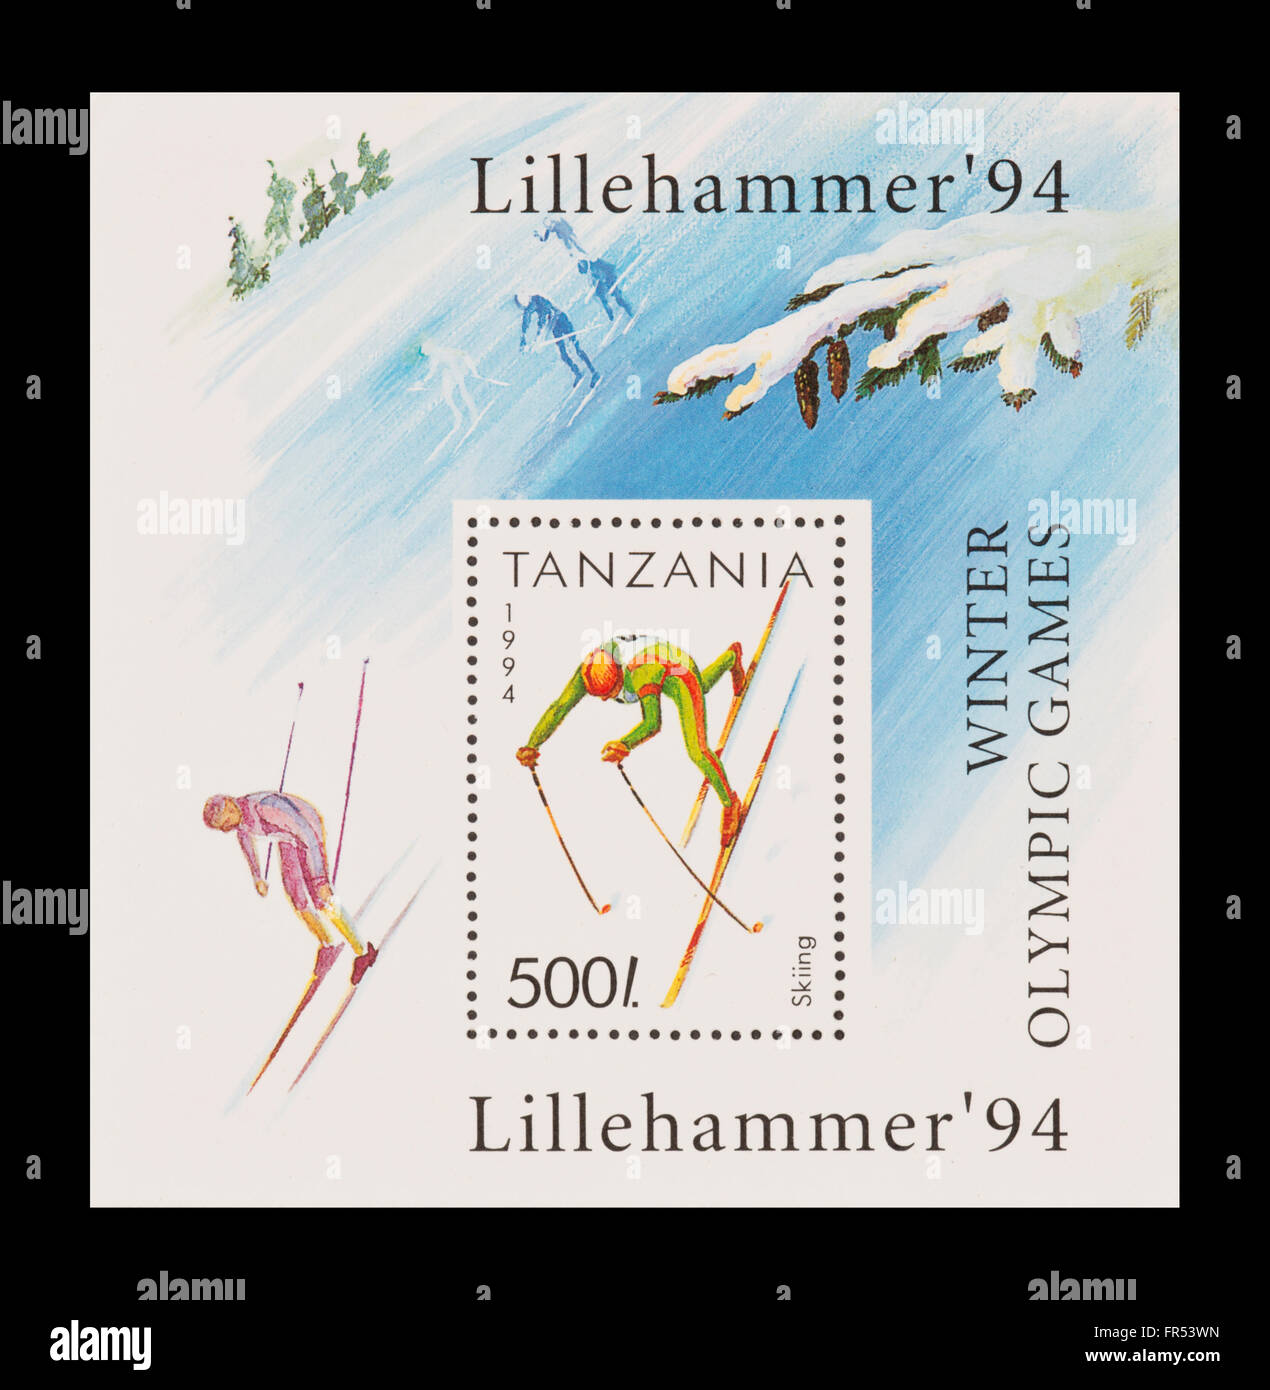 Souvenir sheet from Tanzania depicting a cross-country skier, issued for the 1994 Winter Olympic Games in Lillehammer. Stock Photo